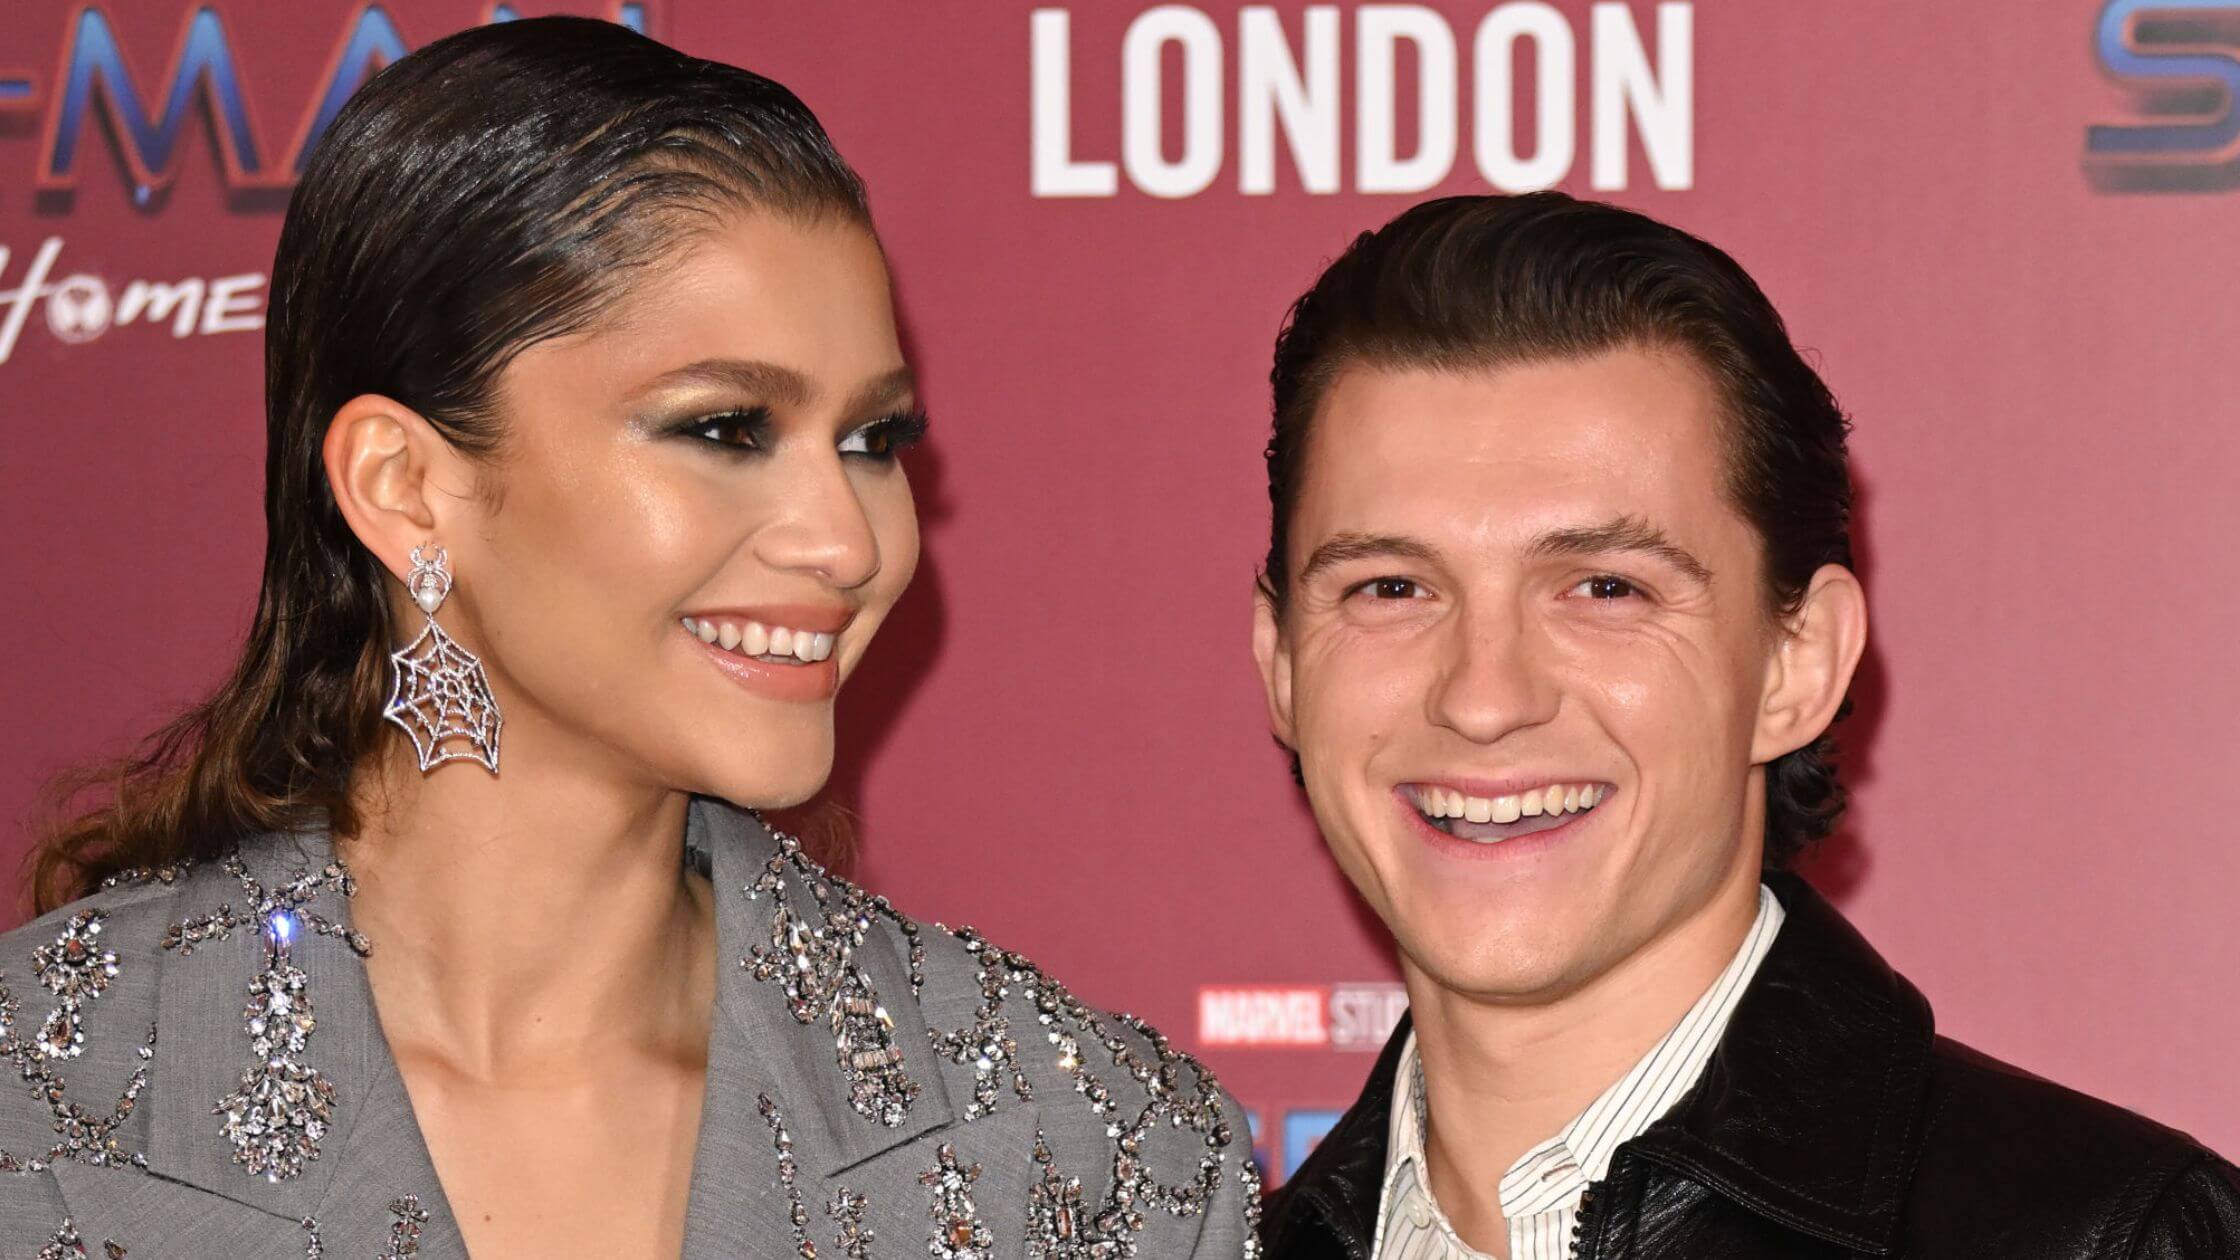 Zendaya Shares Photo With Tom Holland While Celebrating His 26th Birthday